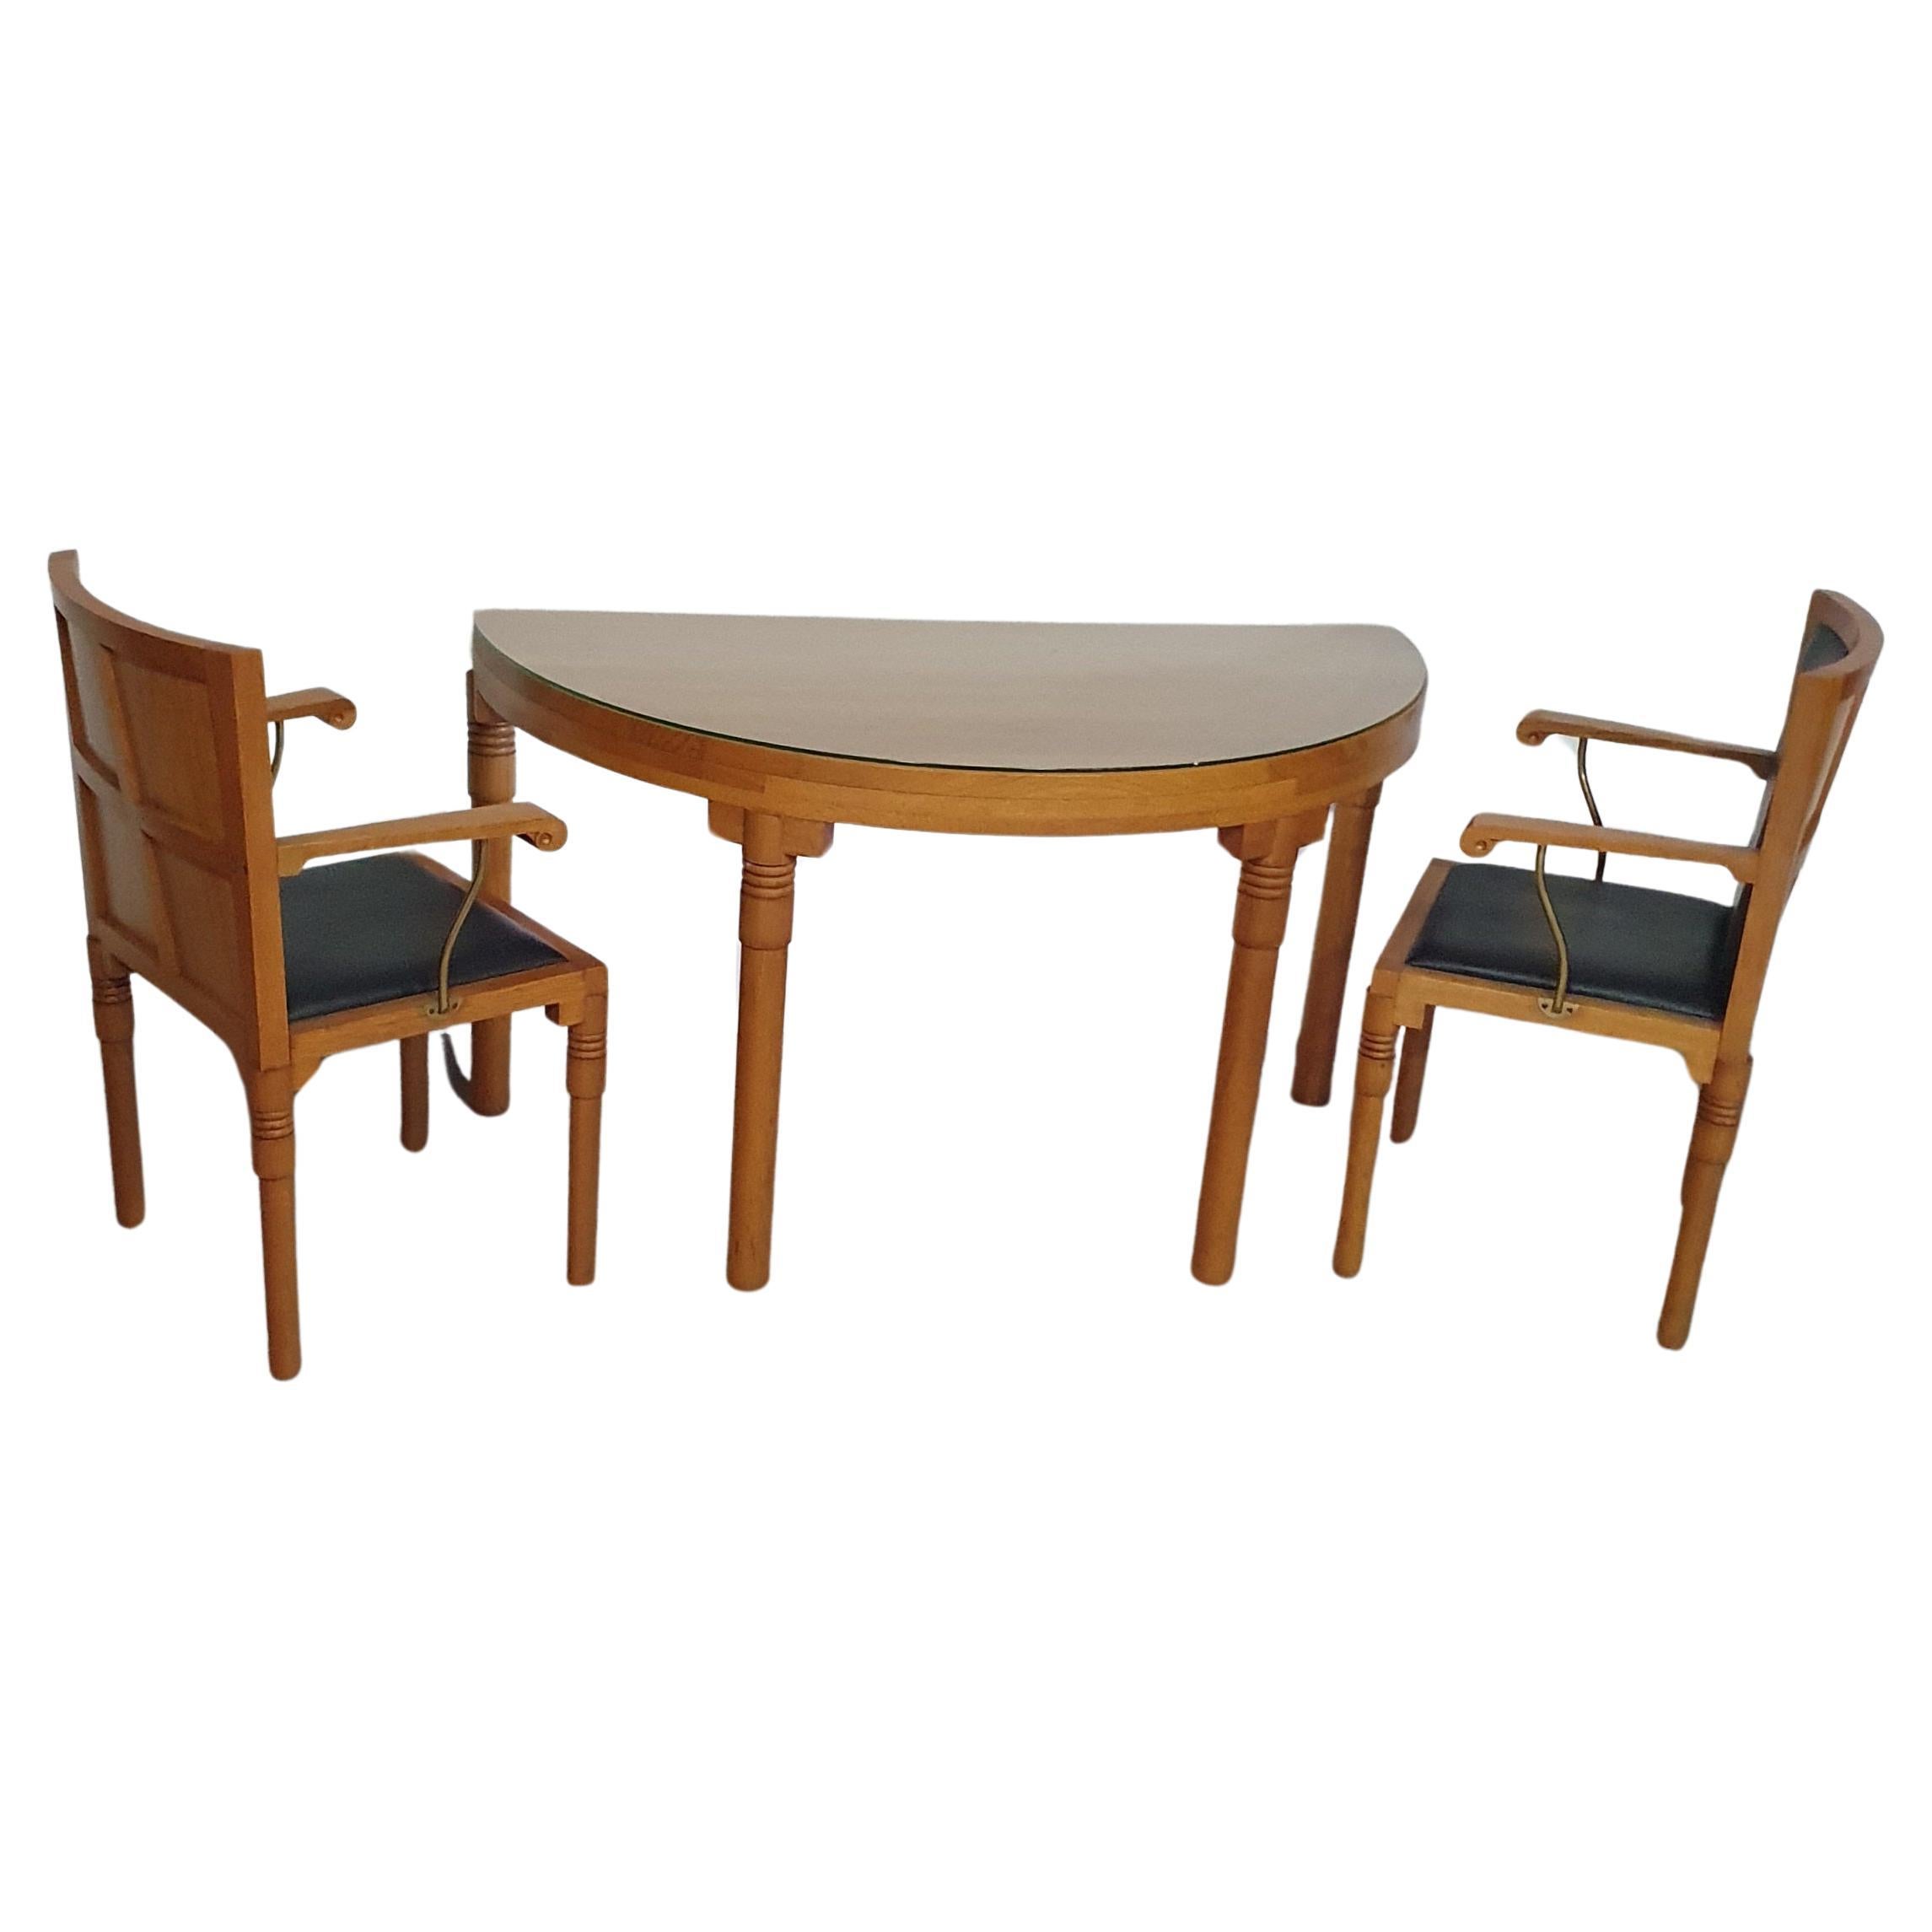 Console set architect Charles Vandenhove 3 x chair / table For Sale